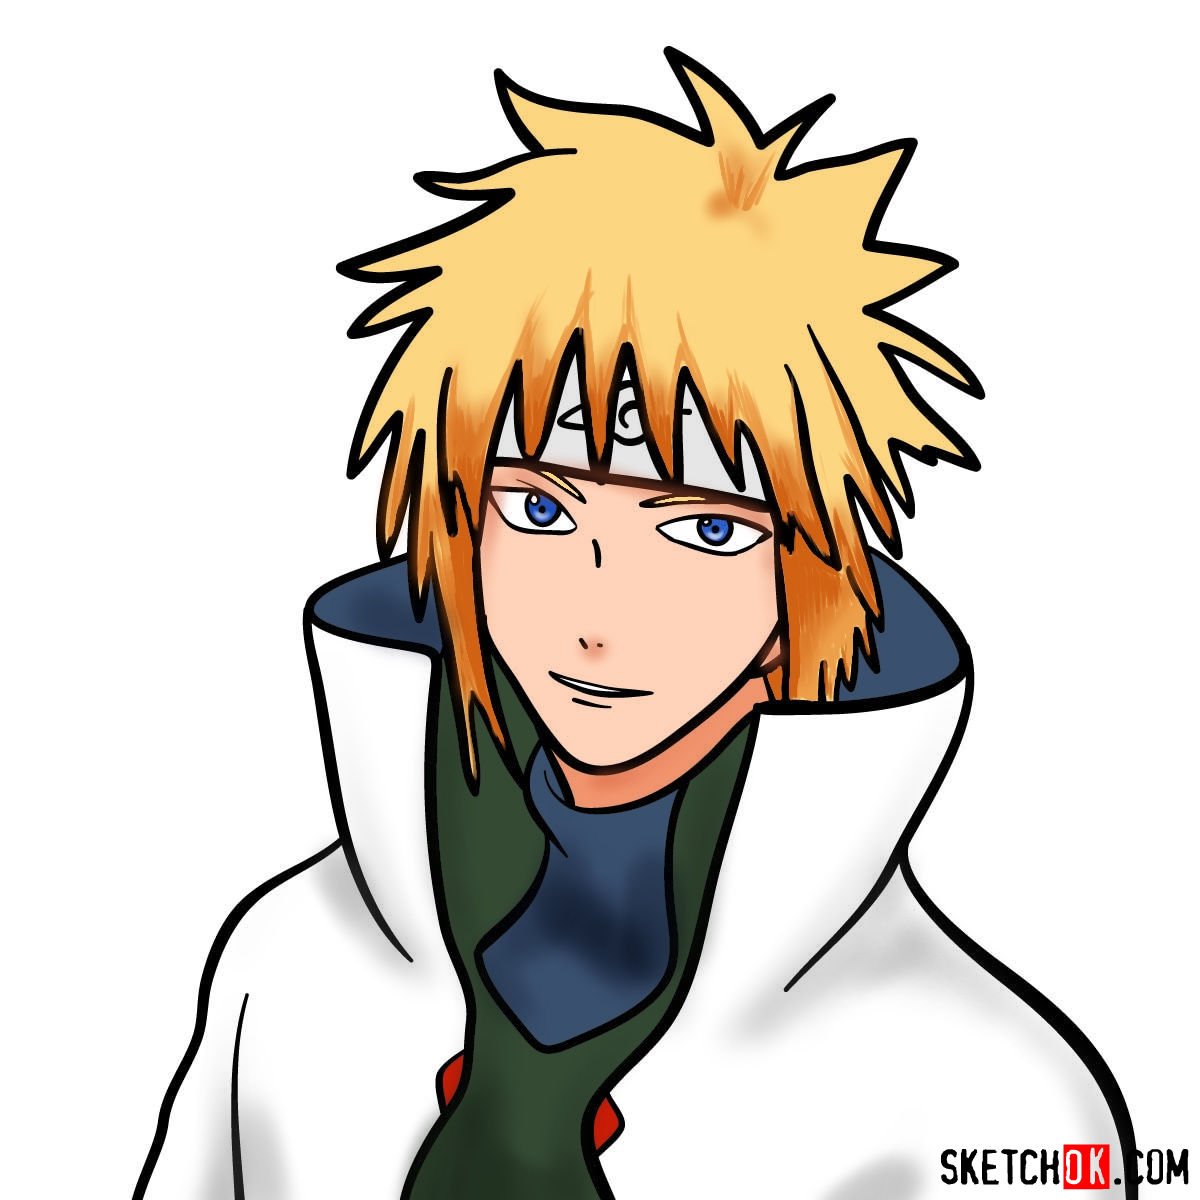 How to draw the face of Minato (Naruto)